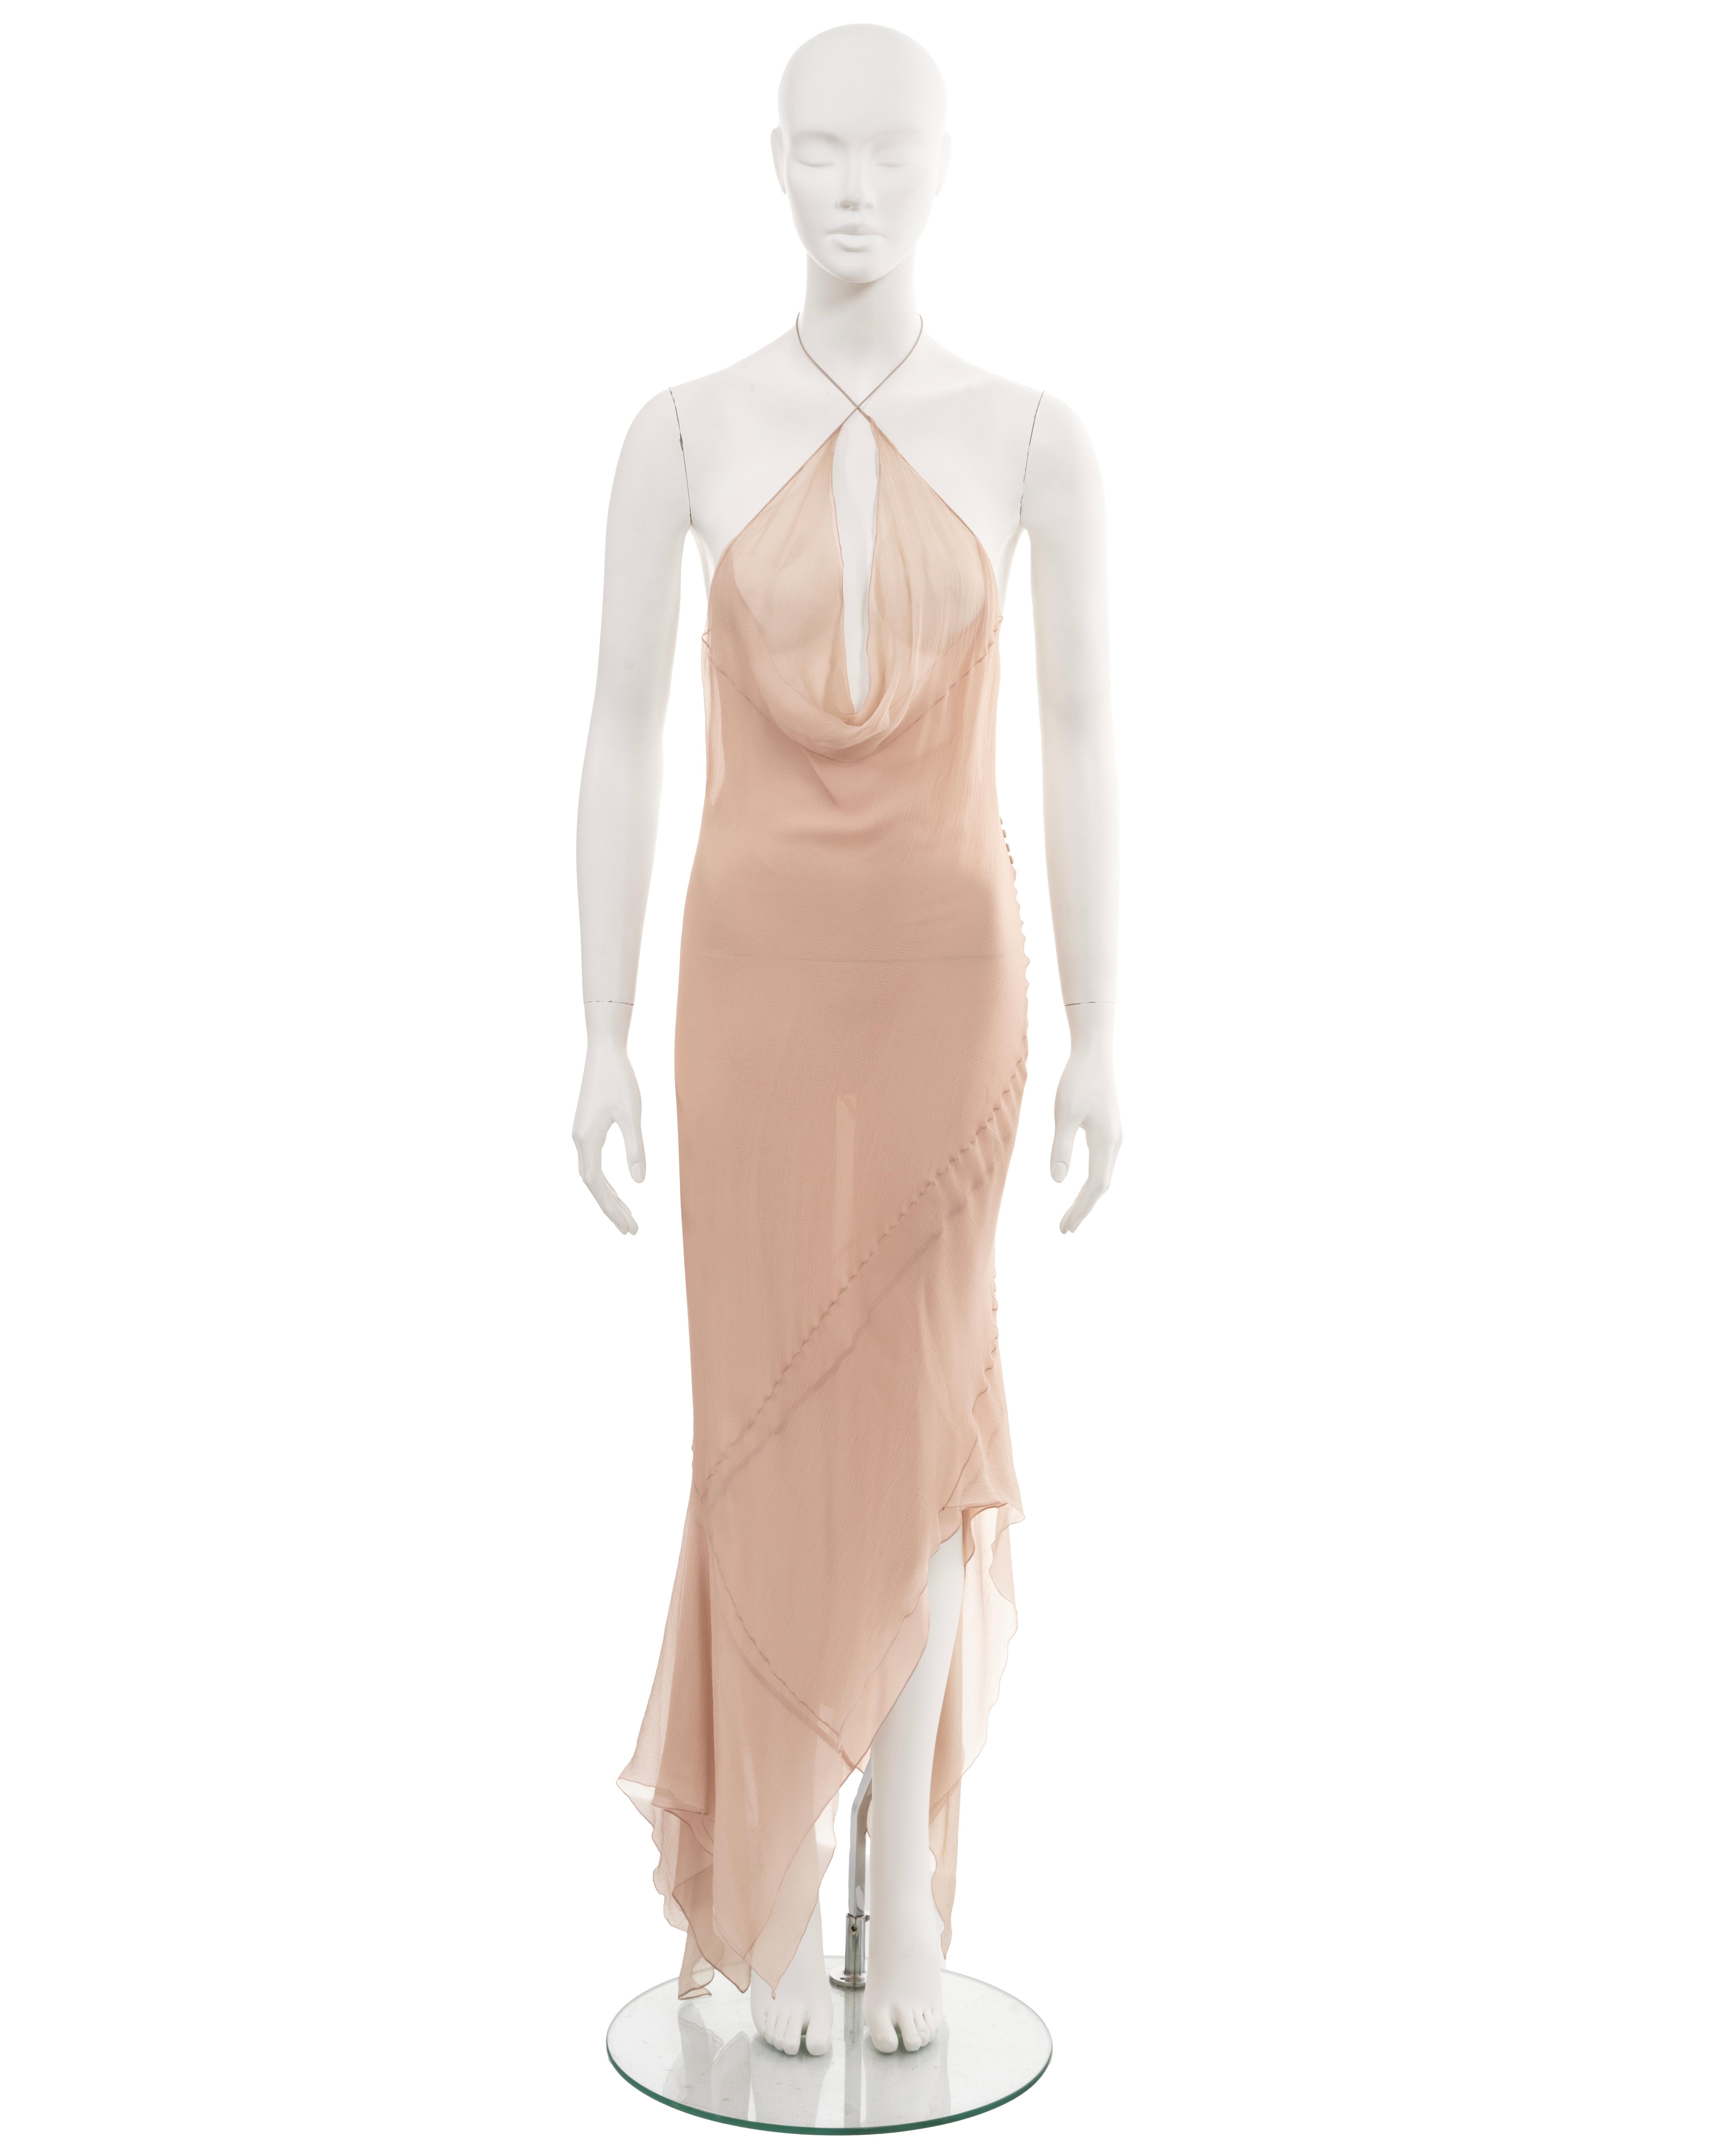 ▪ John Galliano evening dress
▪ Fall-Winter 1997
▪ Double-layered pale pink bias-cut silk chiffon 
▪ 2 string halterneck ties 
▪ Plunging cowl neck
▪ Low back
▪ Asymmetric hemline 
▪ Size approx. Medium 

All photographs in this listing EXCLUDING